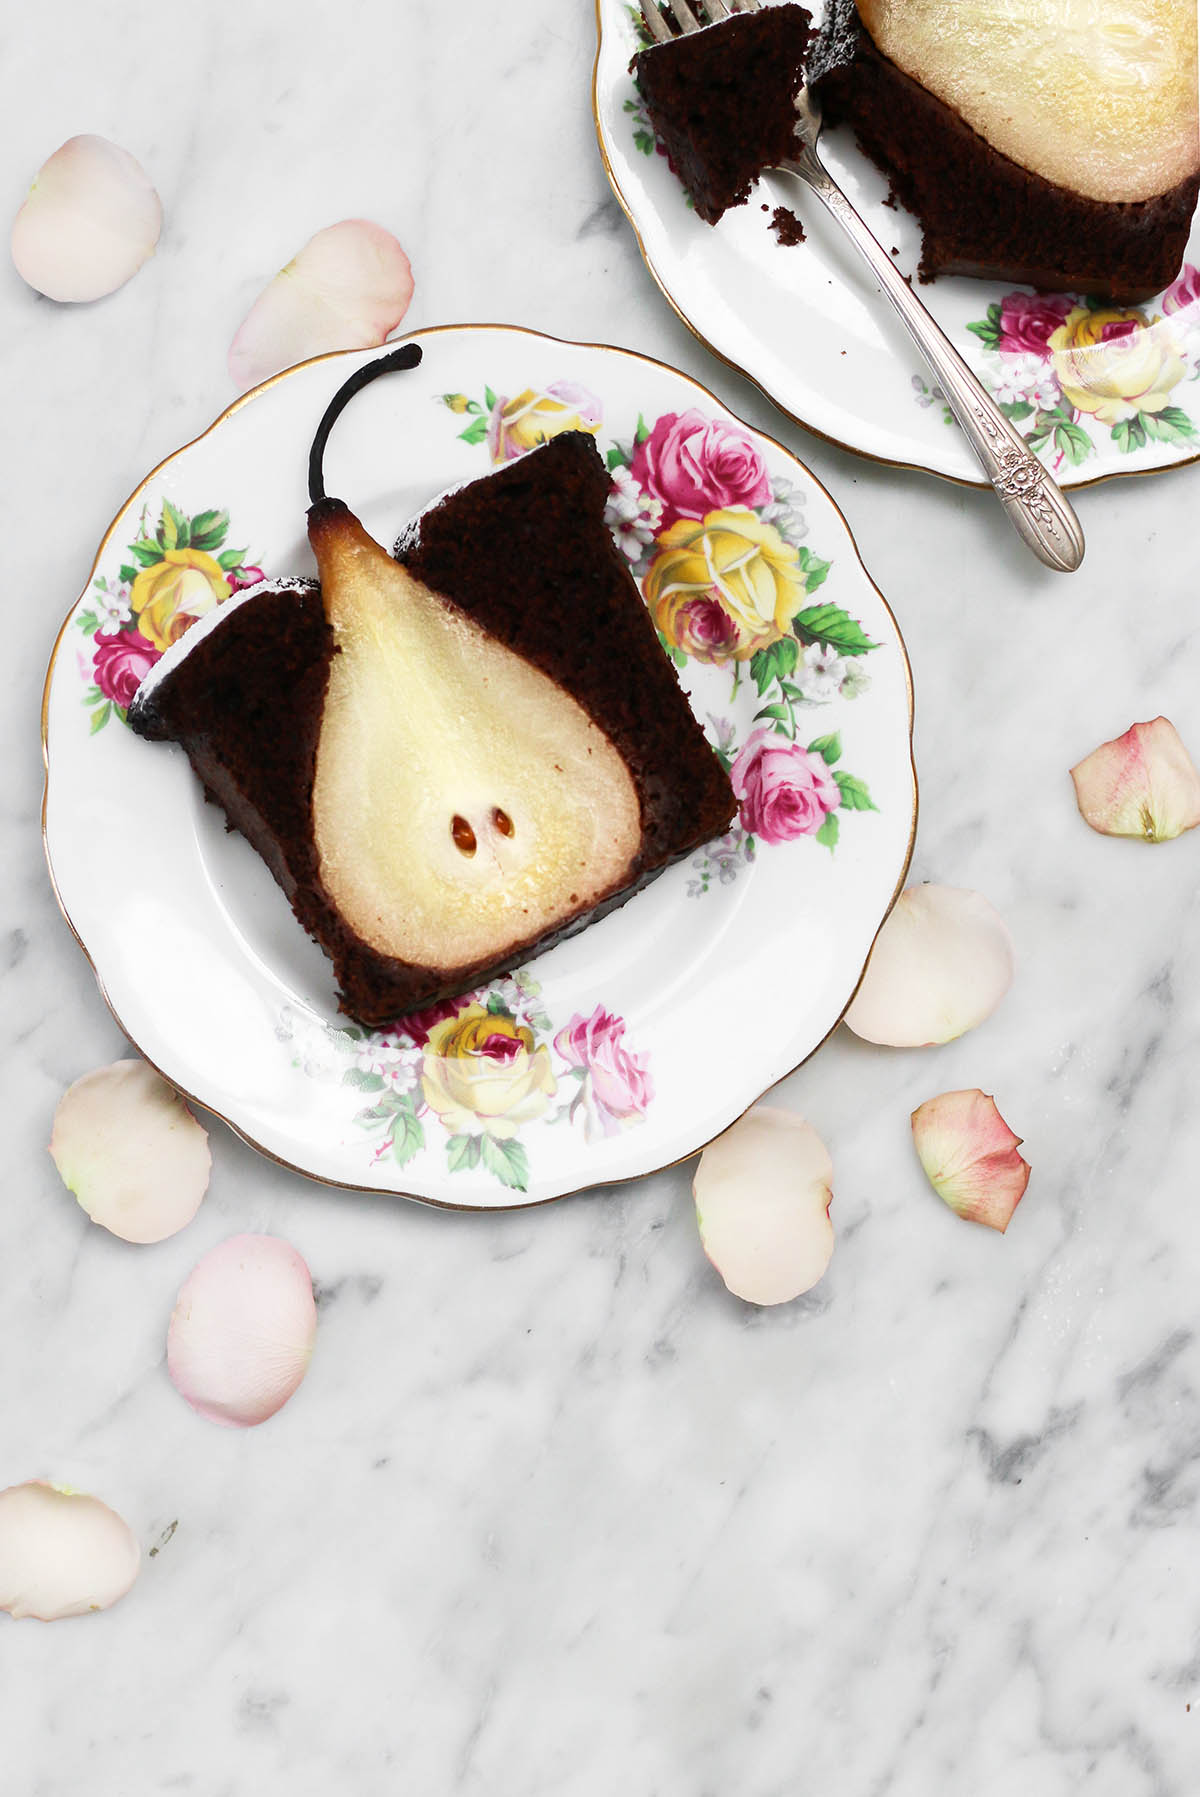 A slice of chocolate cake with a cross section of a poached pear inside the slice.